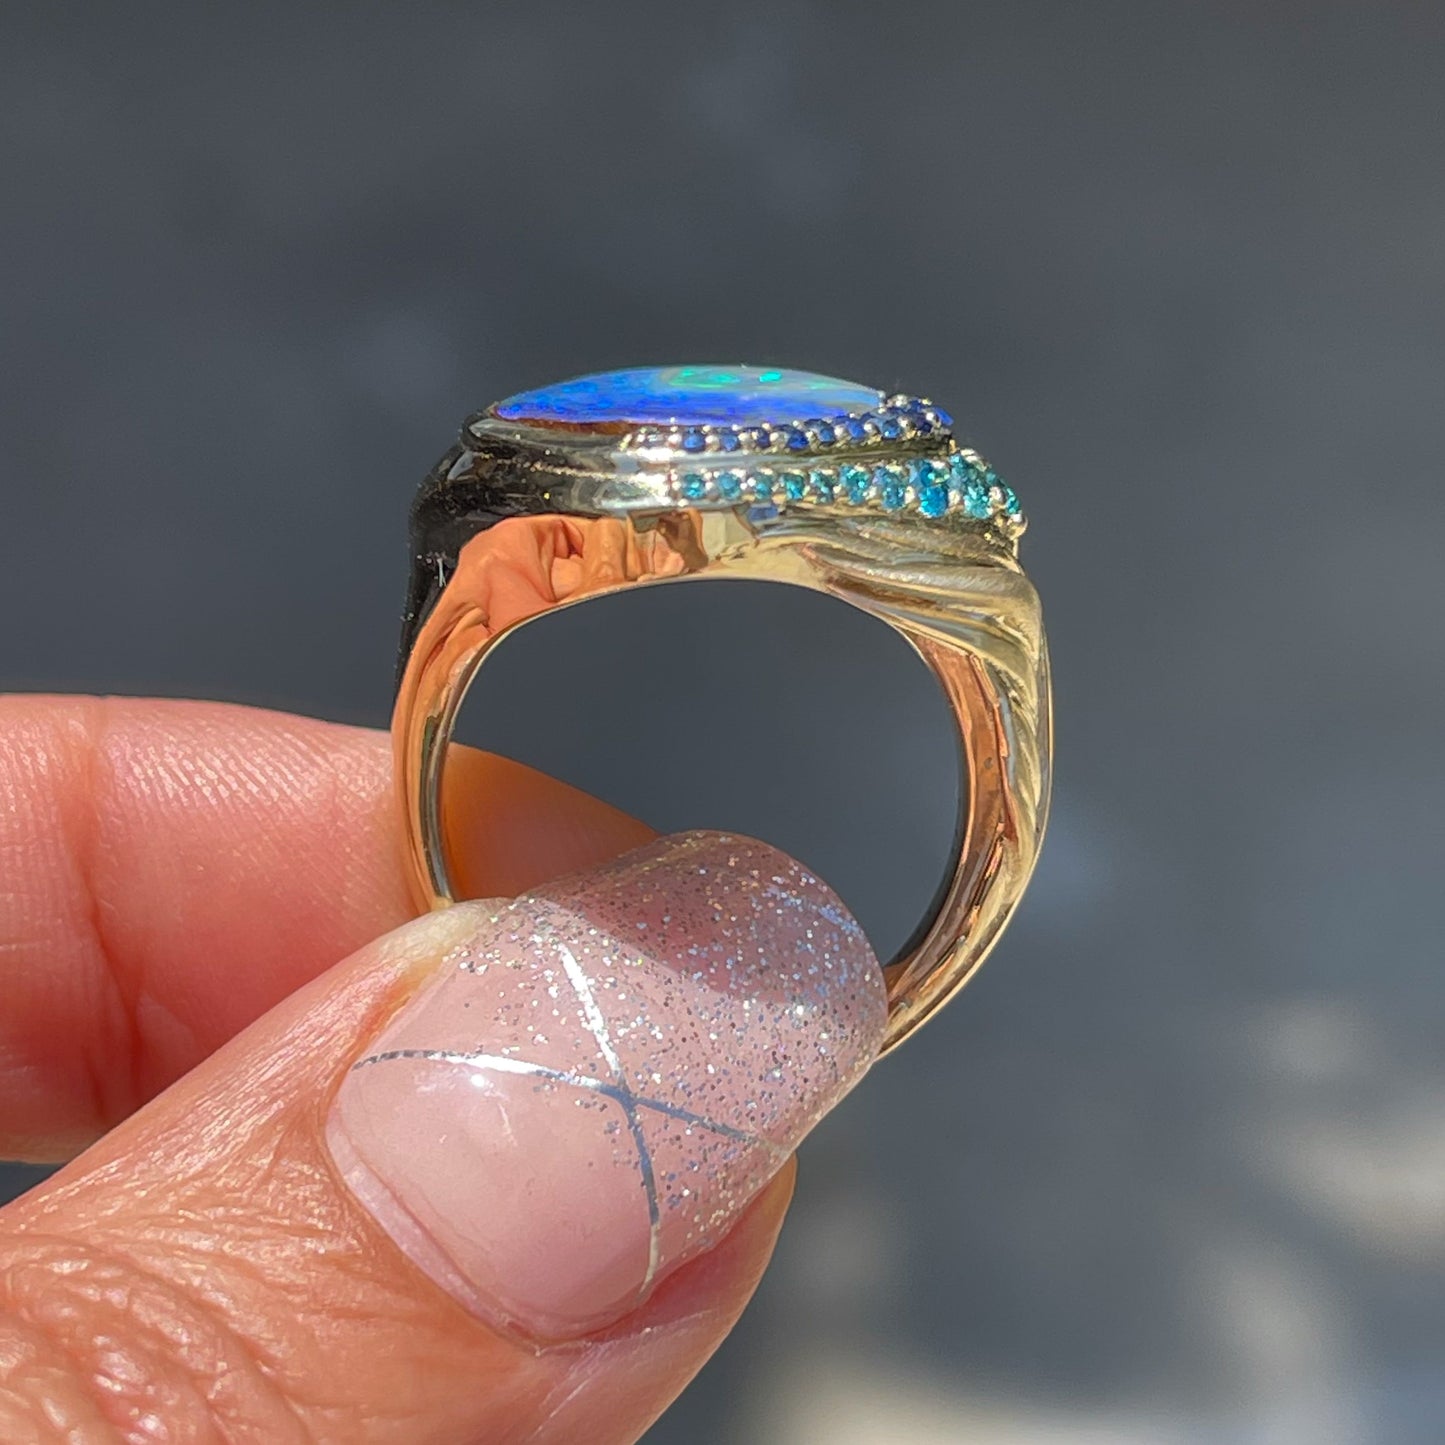 Australian Opal Ring by NIXIN Jewelry shown in profile. Sapphire and opal ring.